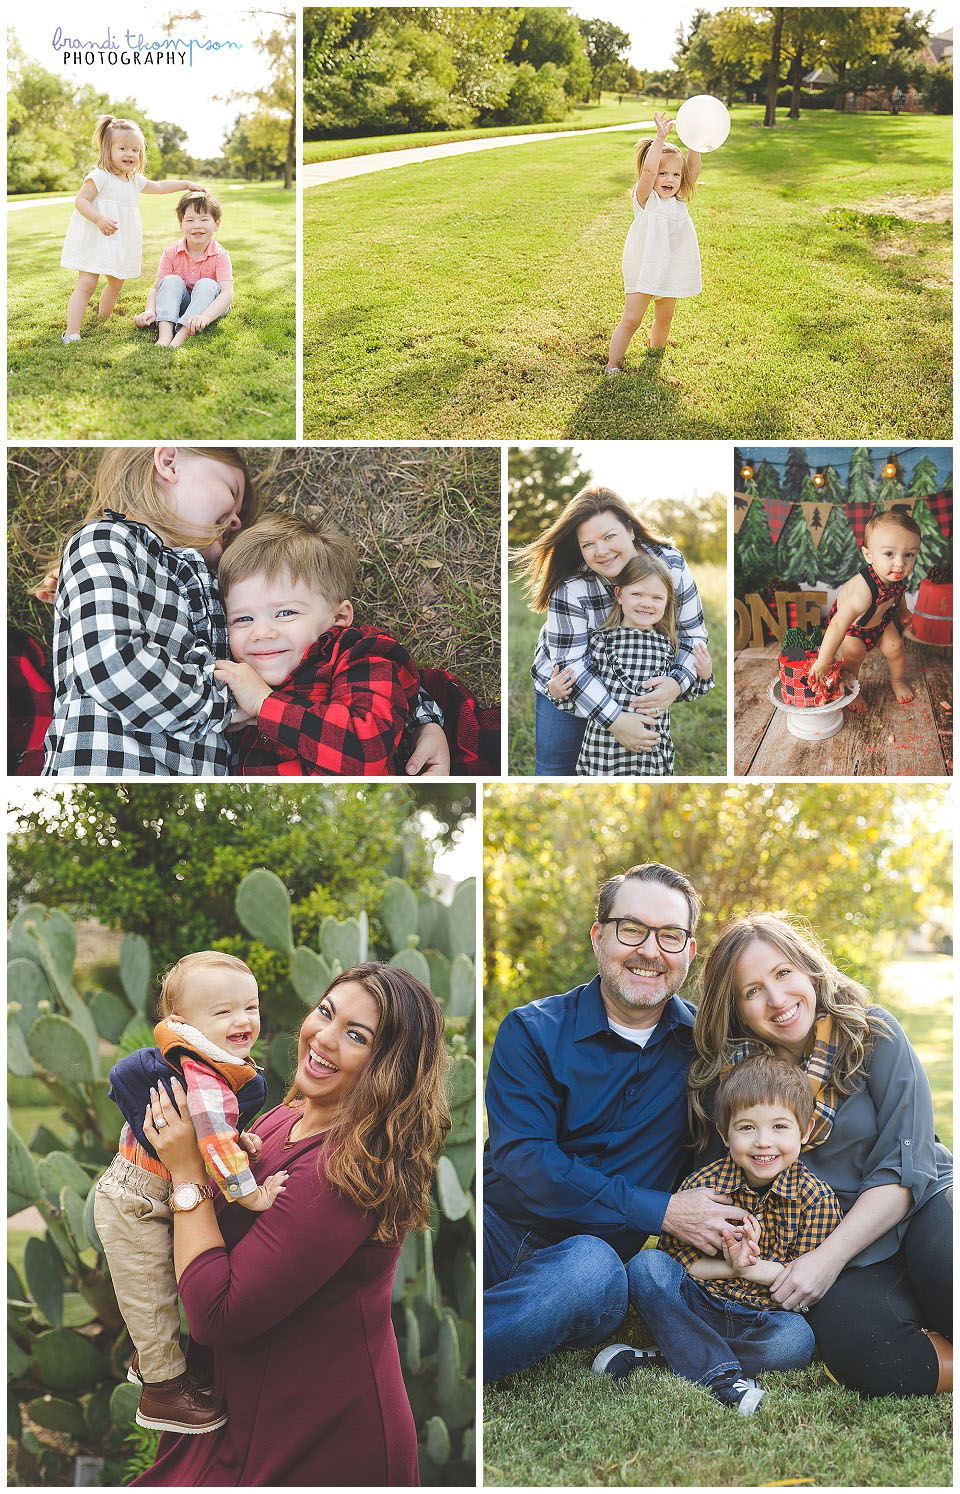 A collage of child and family photographs